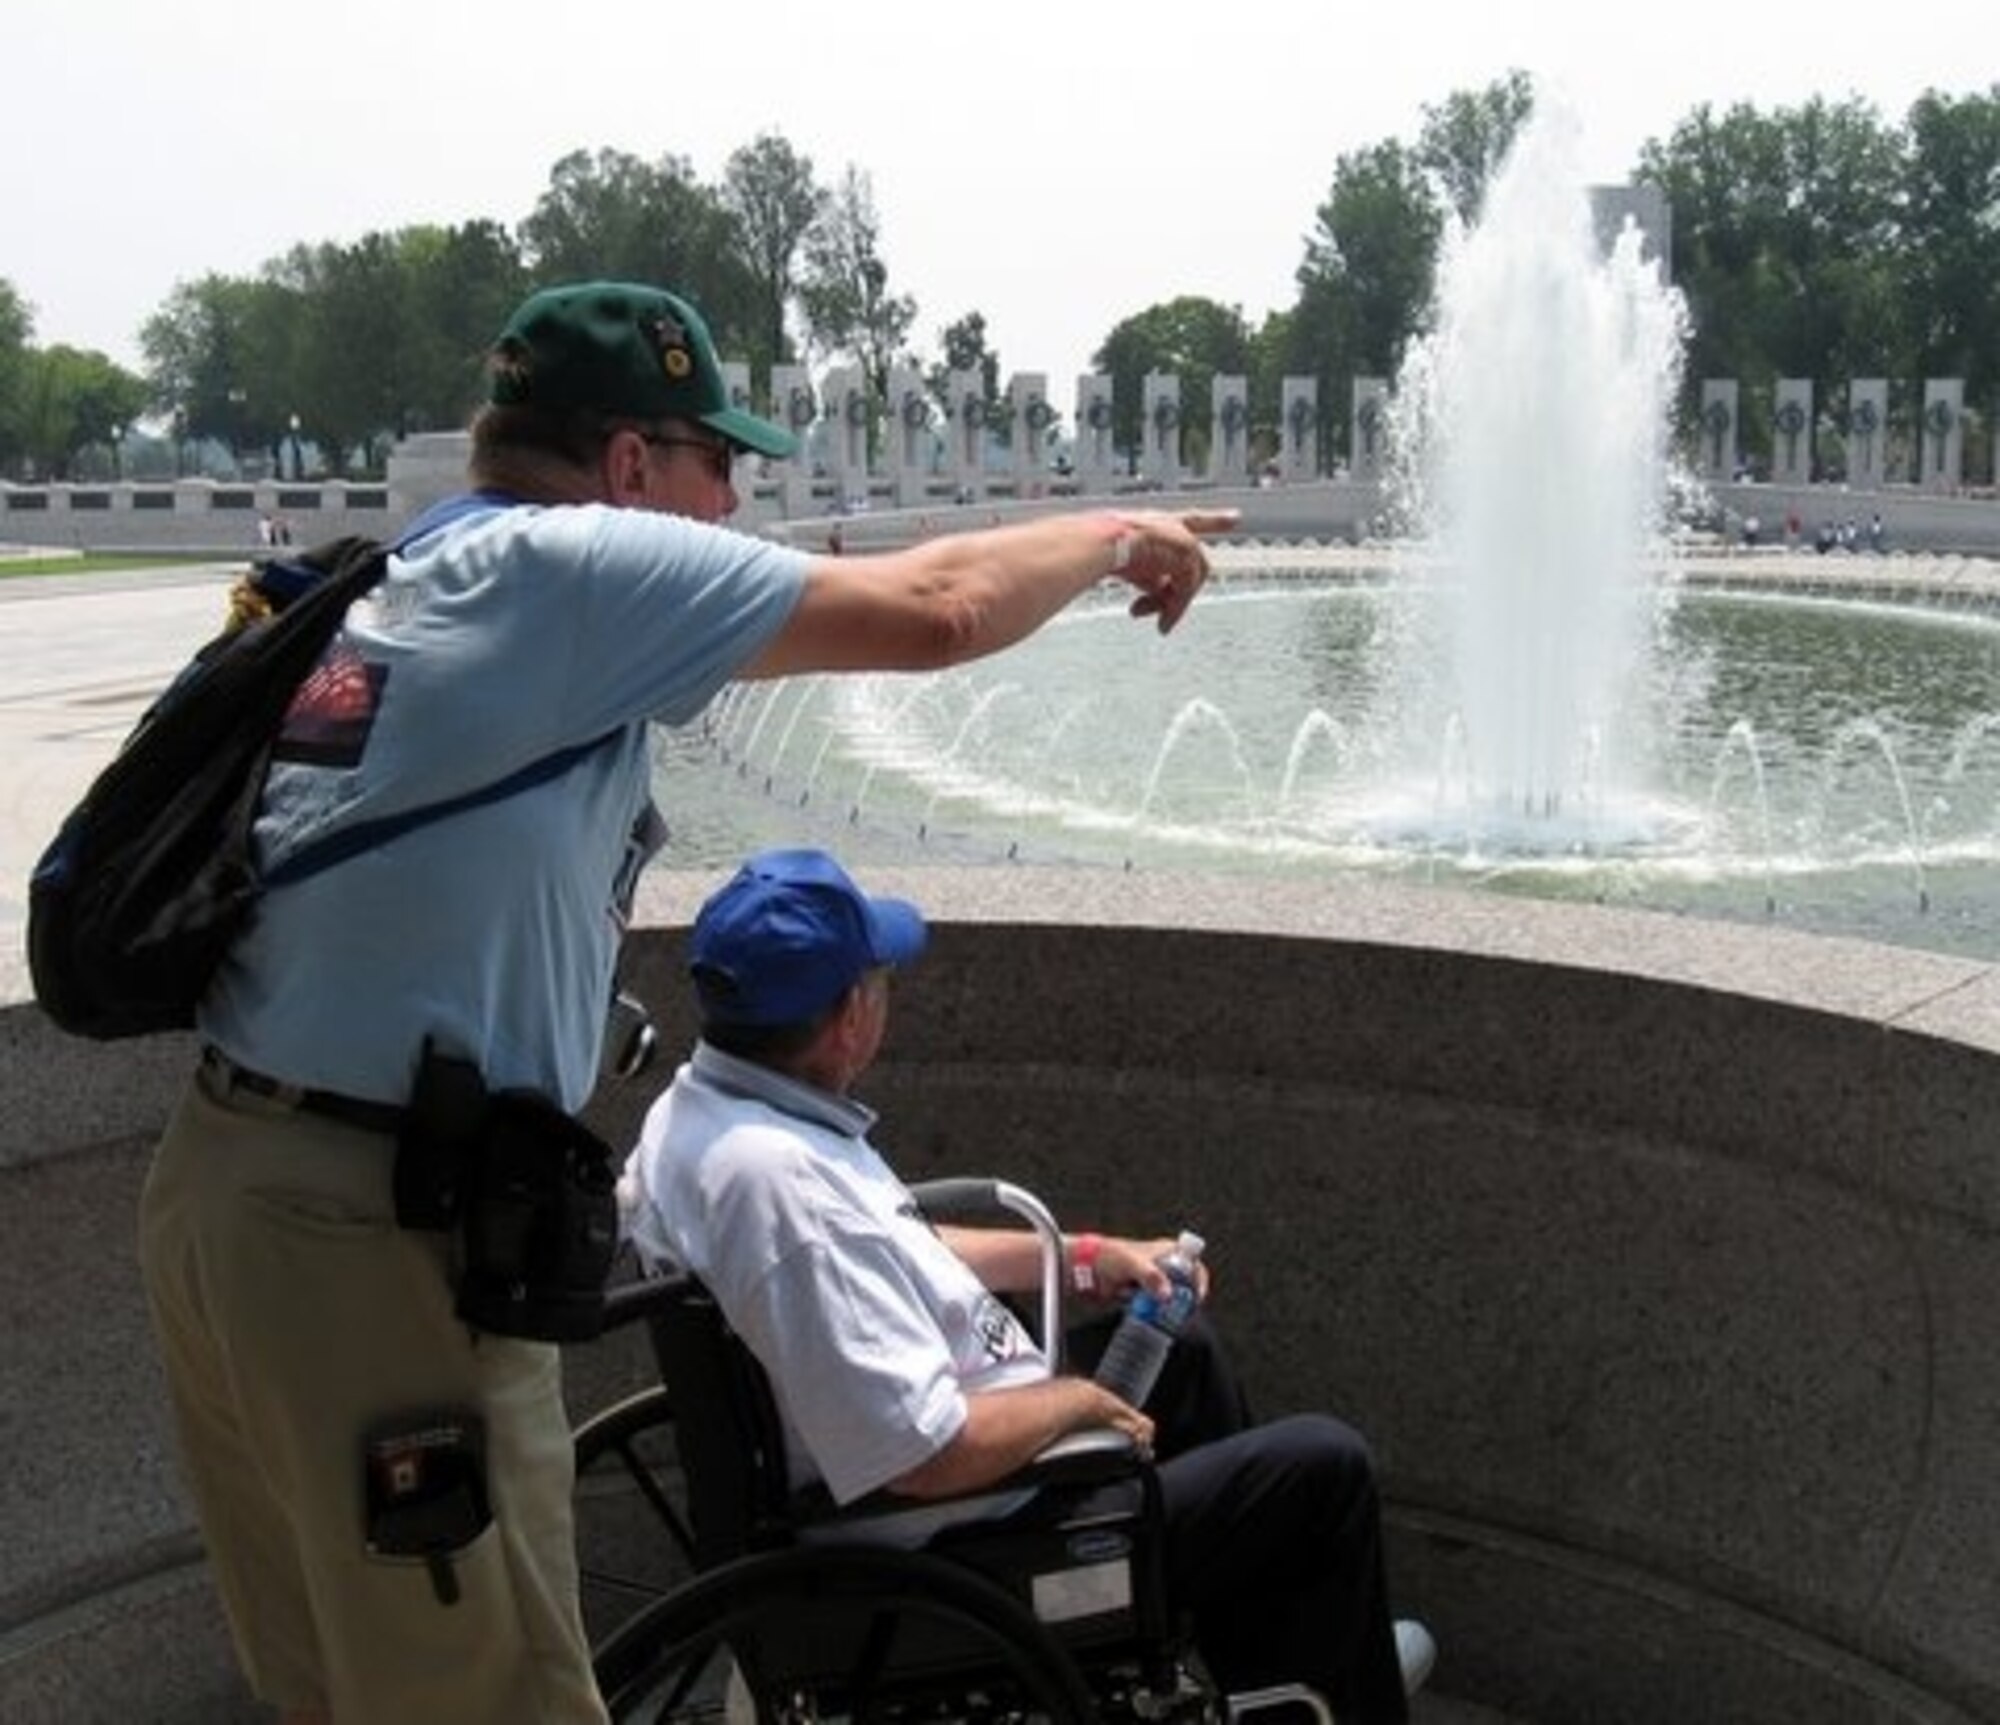 WASHINTONG D.C. -  Jerry Sheldt, left, and his father, WWII veteran Harry Sheldt at the WWII Memorial in Washington D.C.  The two gentlemen participated in a Honor Flight, a flight that brings WWII veterans to the nations capital to view the WWII Memorial in person.  (U.S. Air Force photo/Charlie Miller)